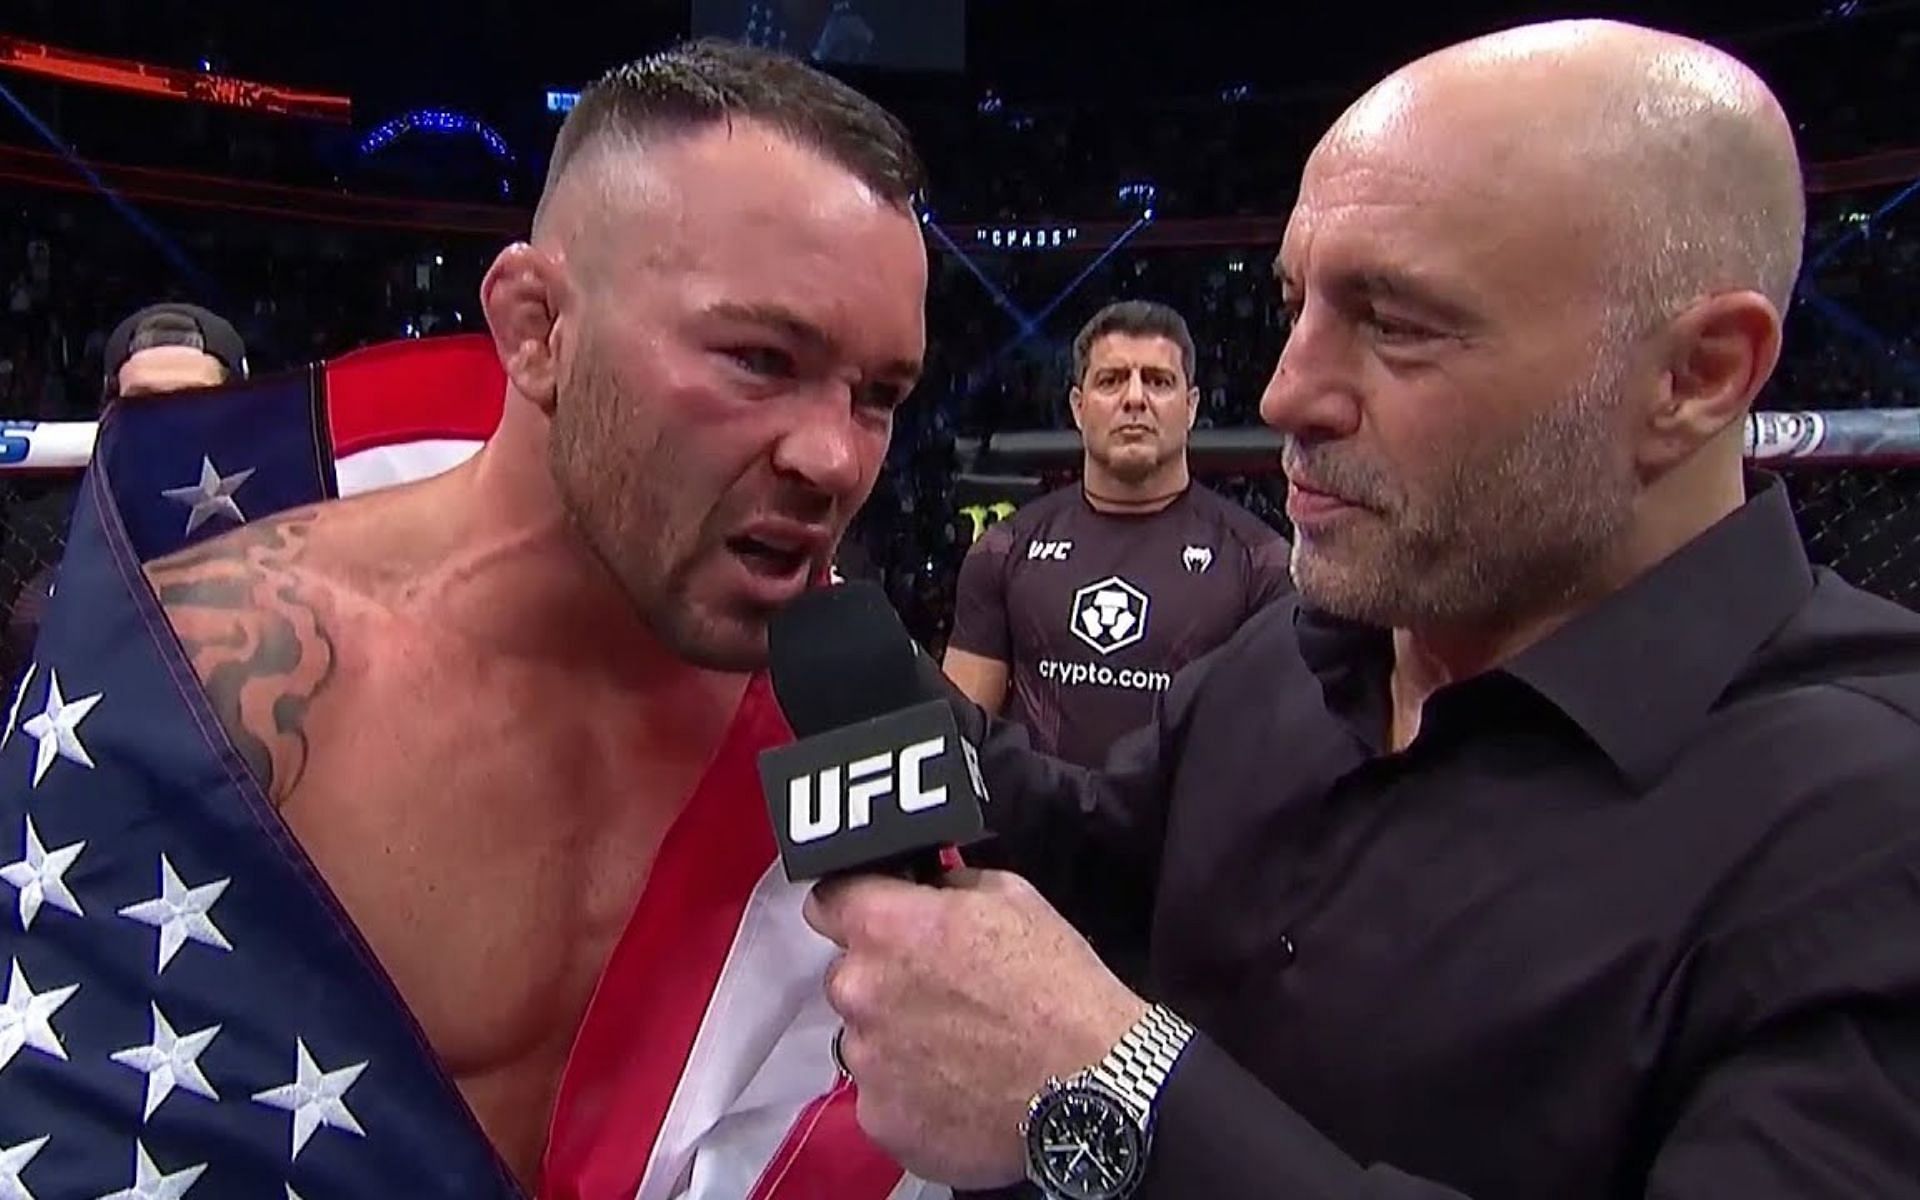 Colby Covington has been involved in numerous cringeworthy post-fight interviews